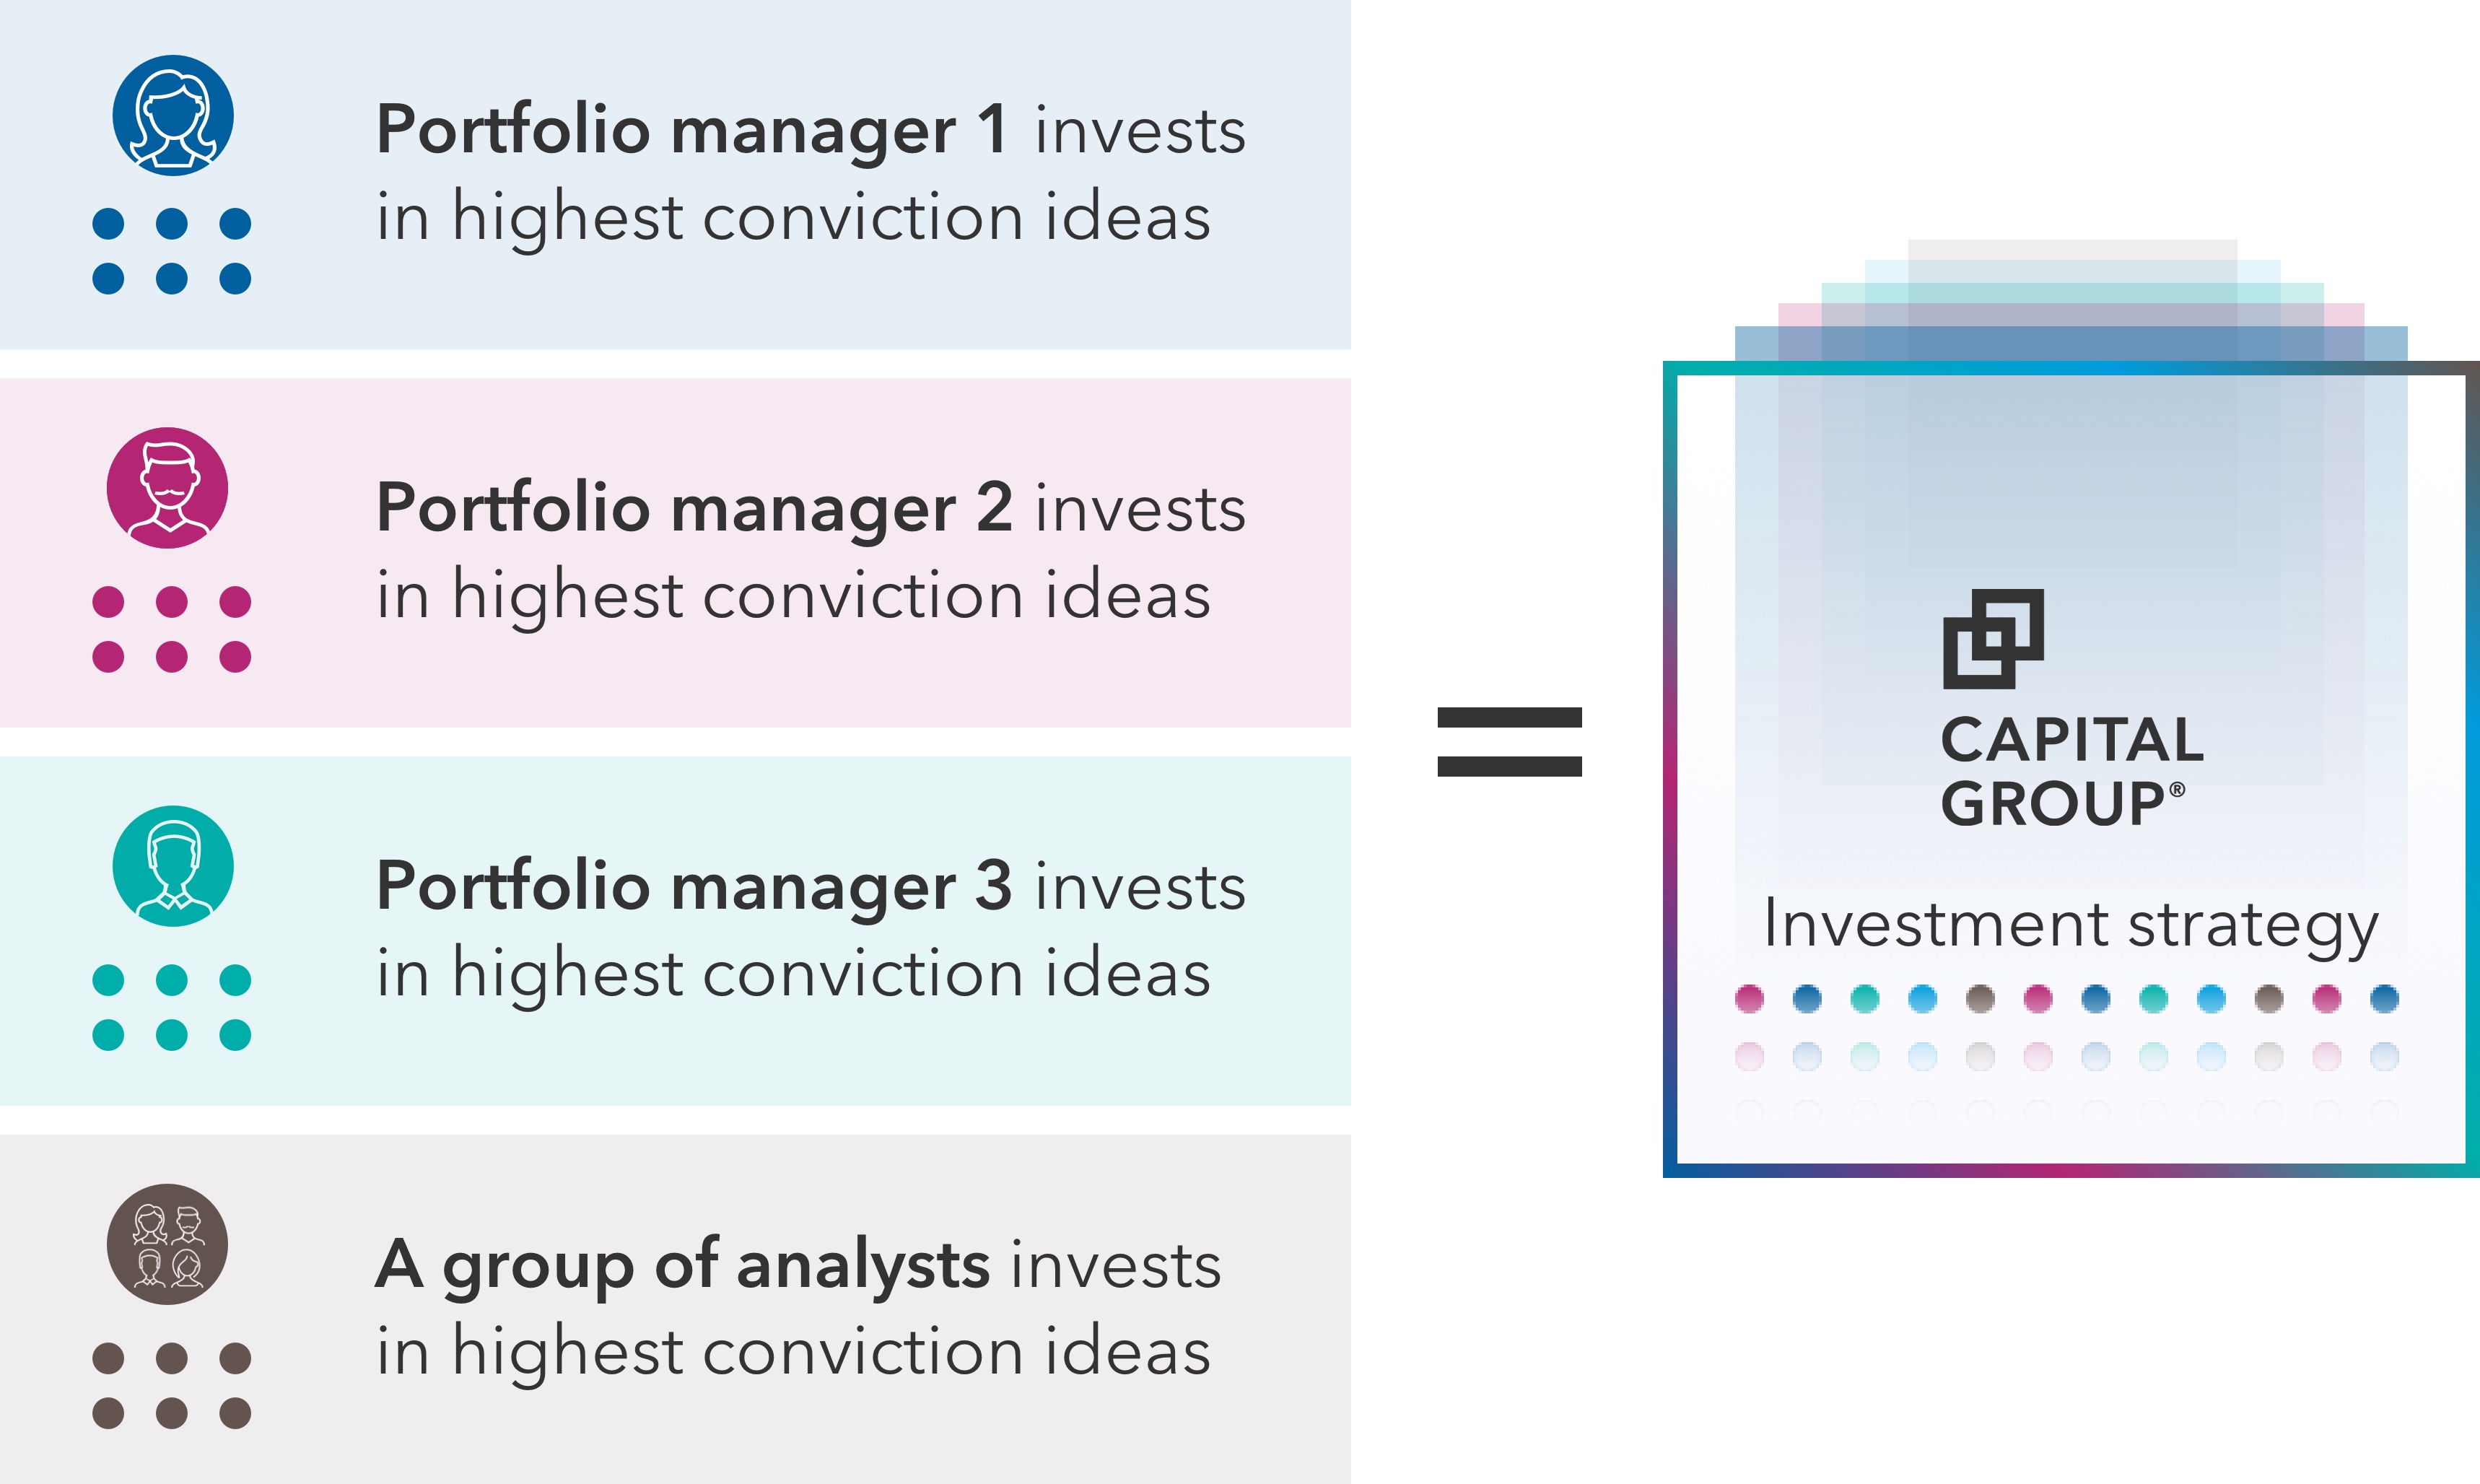 This illustration shows how multiple portfolio managers and analysts contribute to the investments in Capital Group's ETFs by investing in highest conviction ideas. The image shows five rectangles. The first one is labeled: Portfolio manager 1 and shows six dots to represent their six strongest conviction investment ideas. The second rectangle is labeled: Portfolio manager 2 and shows 10 dots. The third rectangle is labeled: Portfolio manager 3 and shows 7 dots. The fourth rectangle is labeled: Portfolio manager 4 and shows 10 dots. The fifth rectangle is labeled: A group of analysts and shows 10 dots. There is an equal sign following the portfolio manager and analyst rectangles. On the opposite side of the equal sign is a square that reads: Capital Group investment strategy to show that after the portfolio managers and analysts invest in highest conviction ideas those investments make up all the companies the investment strategy is invested in. While there isn't a dedicated research portfolio in Capital Group ETFs, the research analysts' views inform portfolio managers' decision making regarding holdings and portfolio construction.